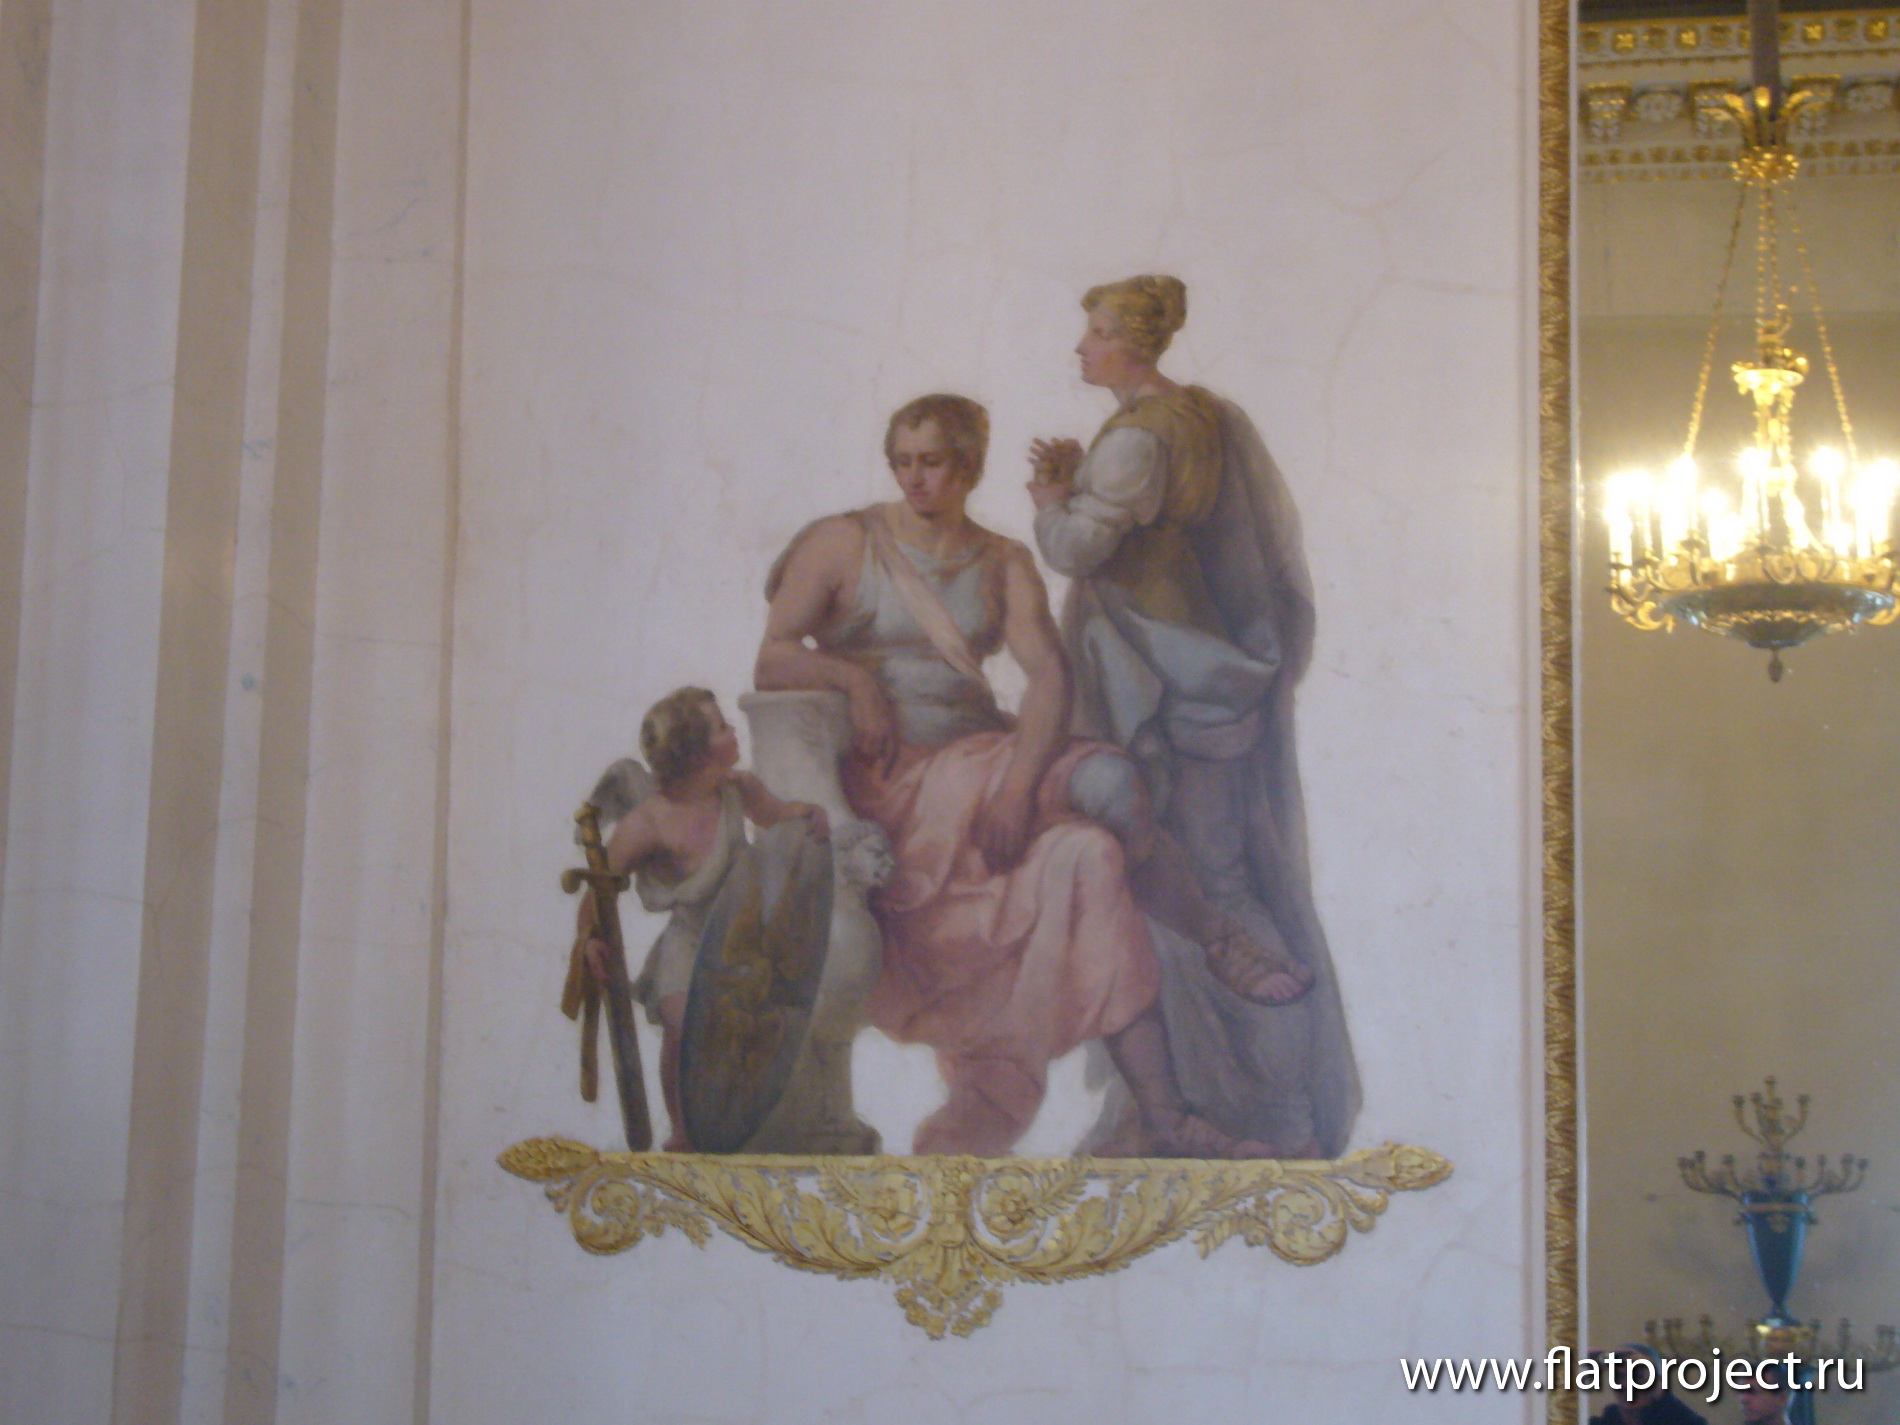 The State Russian museum interiors – photo 116